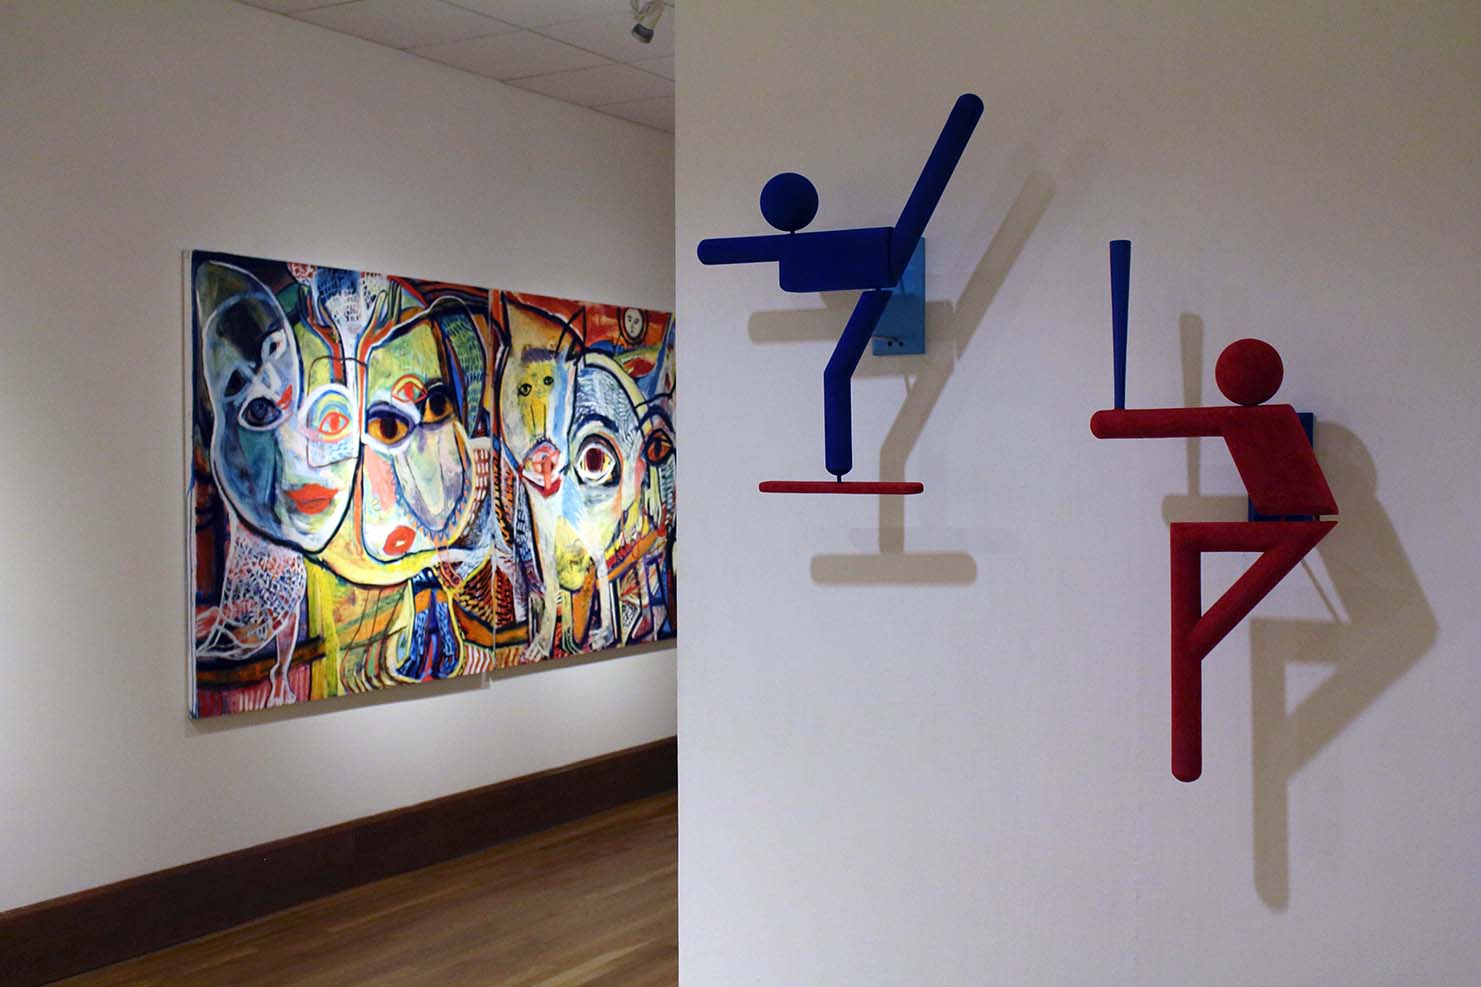 Foreground installation view of blue and red universal graphic sculptures of karate and baseball figures with expressionistic colorful oil on canvas painting in background.